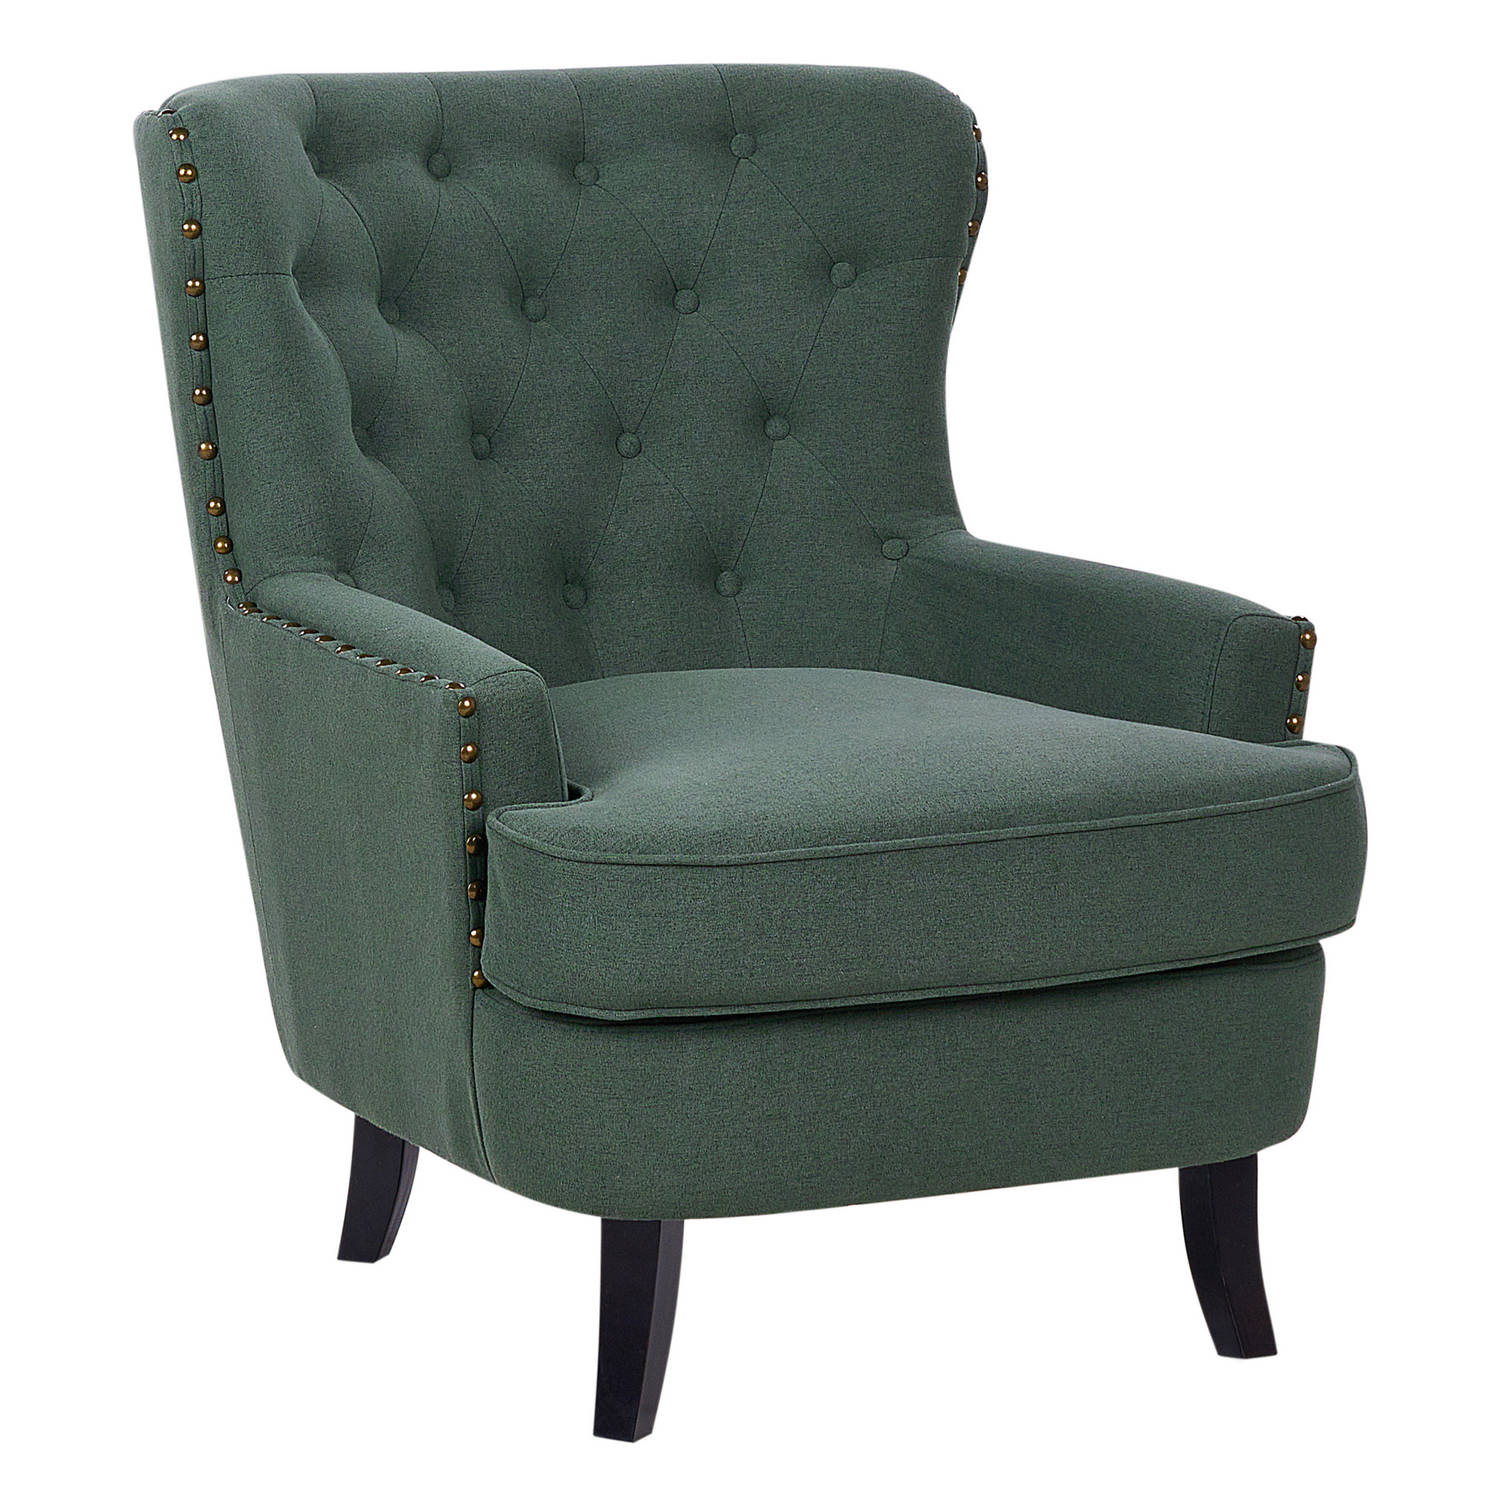 VIBORG II - Chesterfield fauteuil - Donkergroen - Polyester